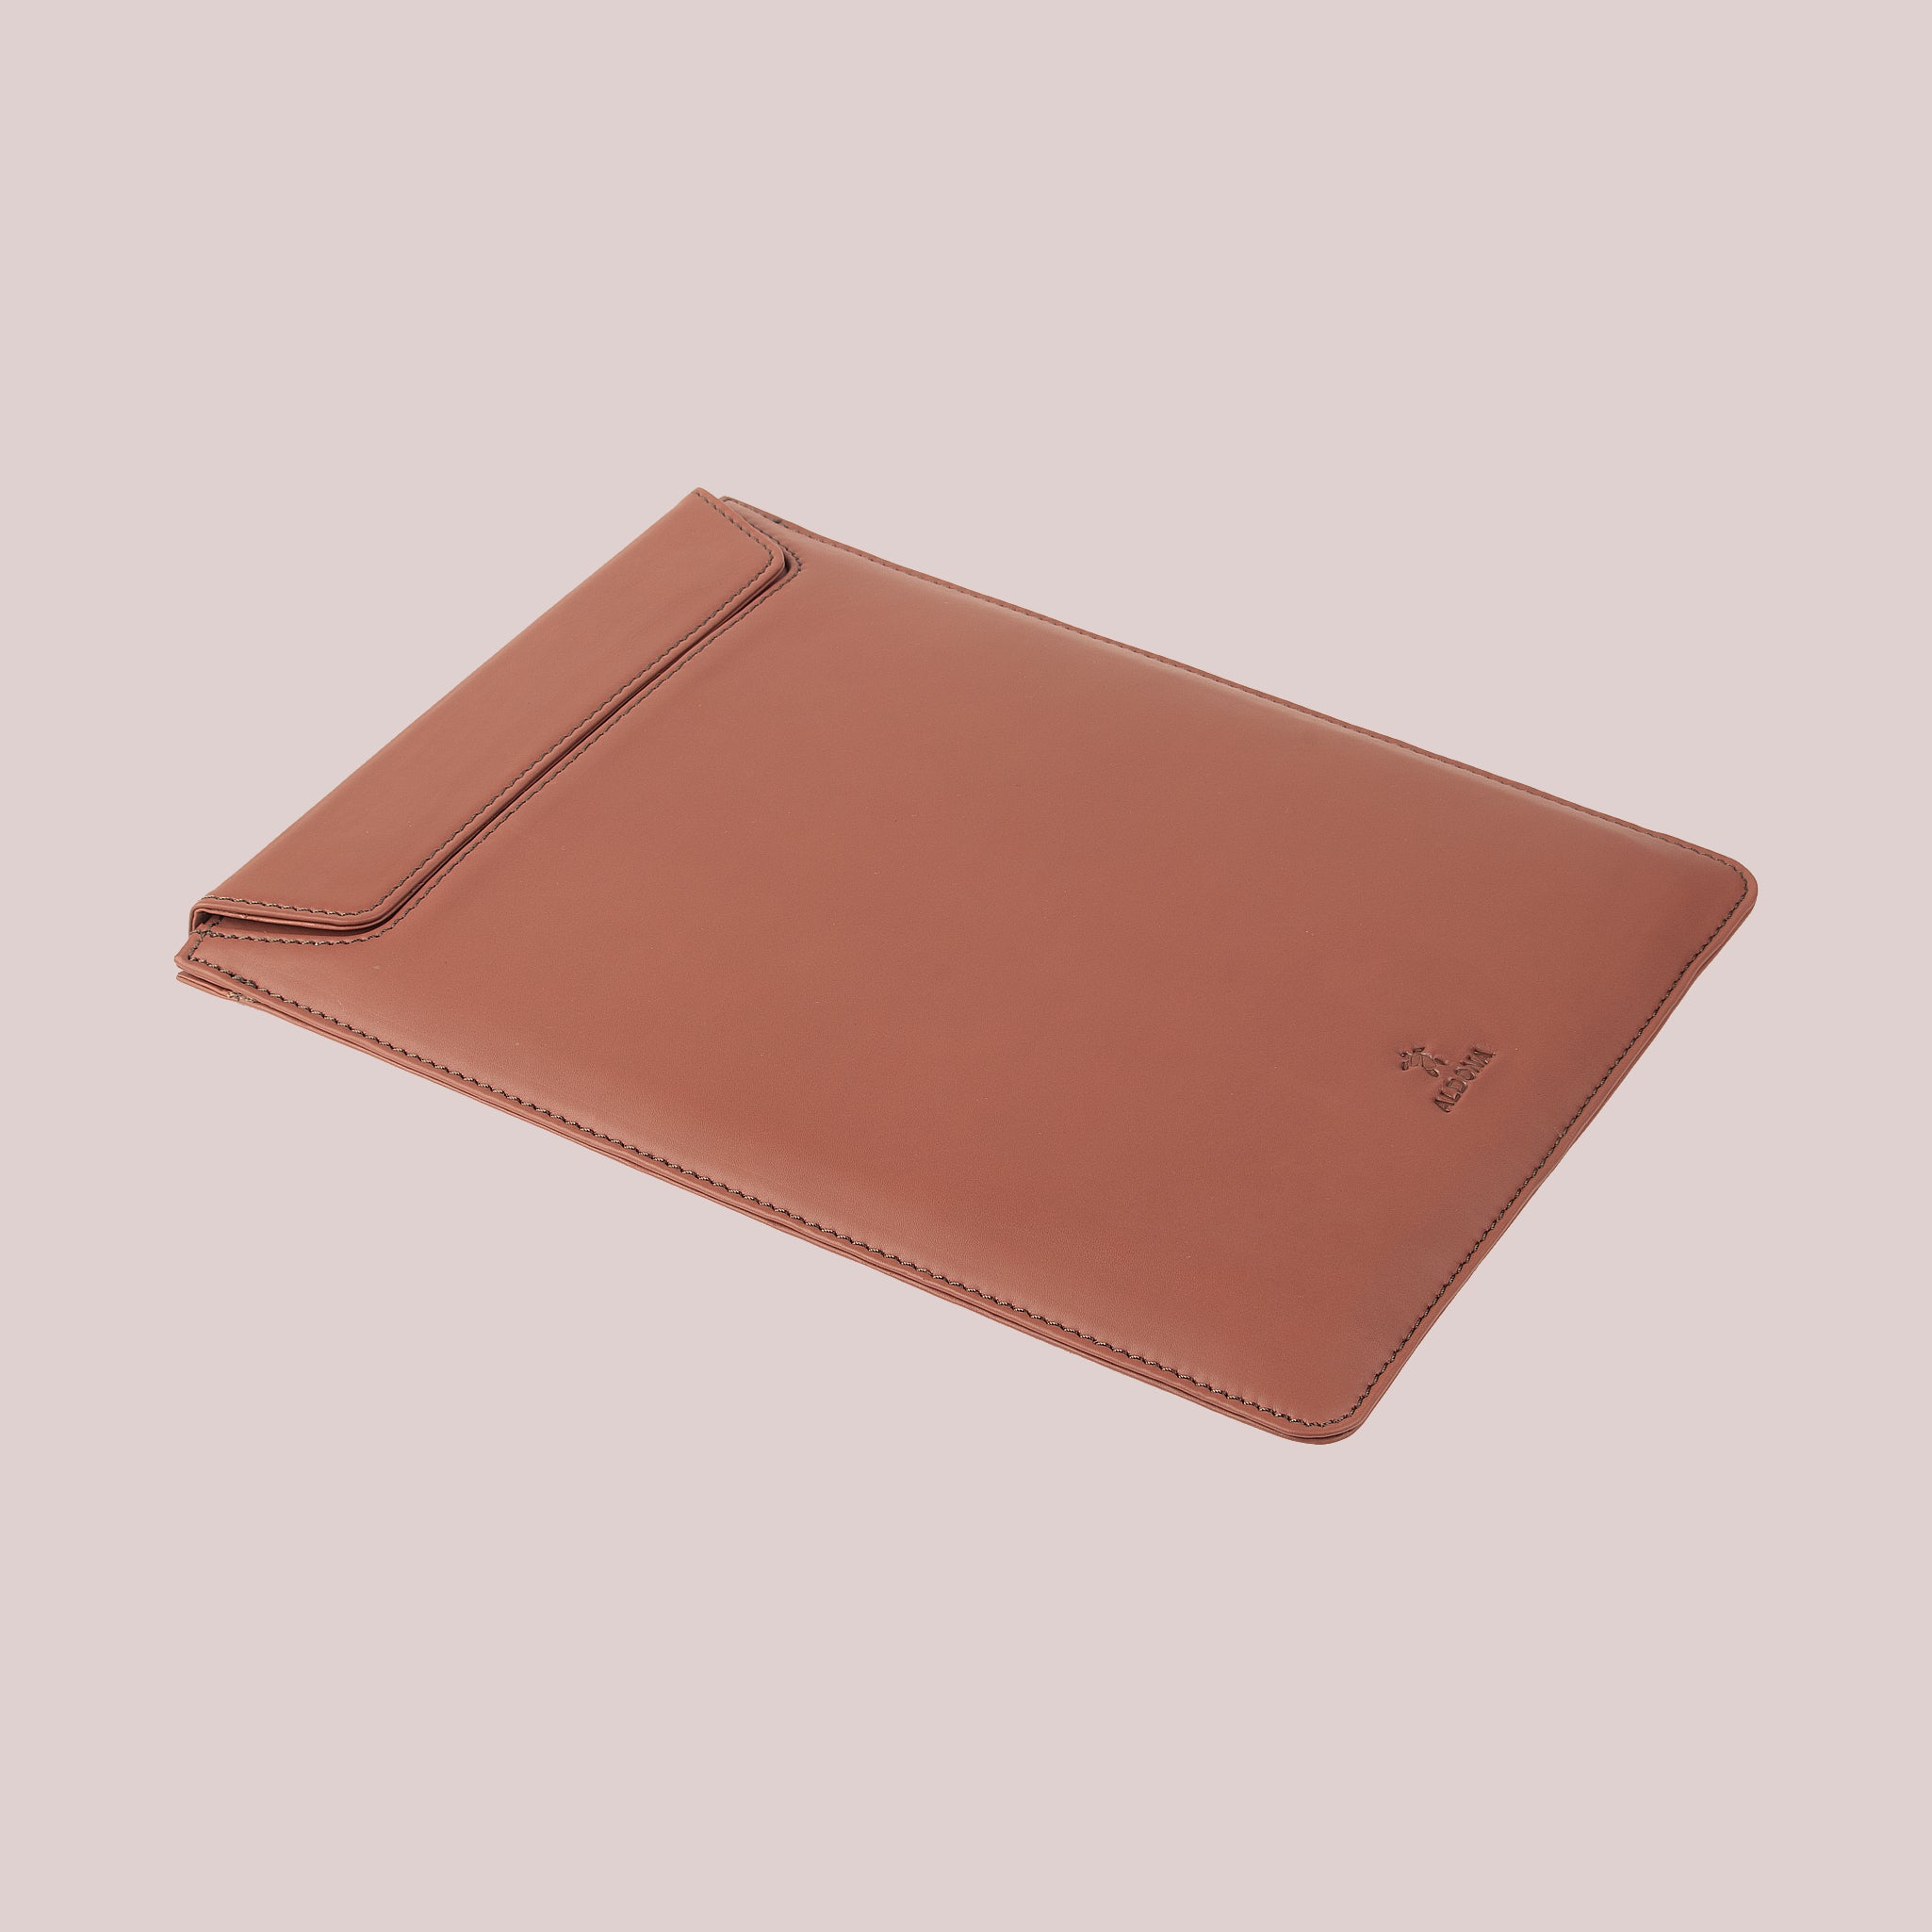 Buy online brown leather sleeve for Macbook laptops, with a flap